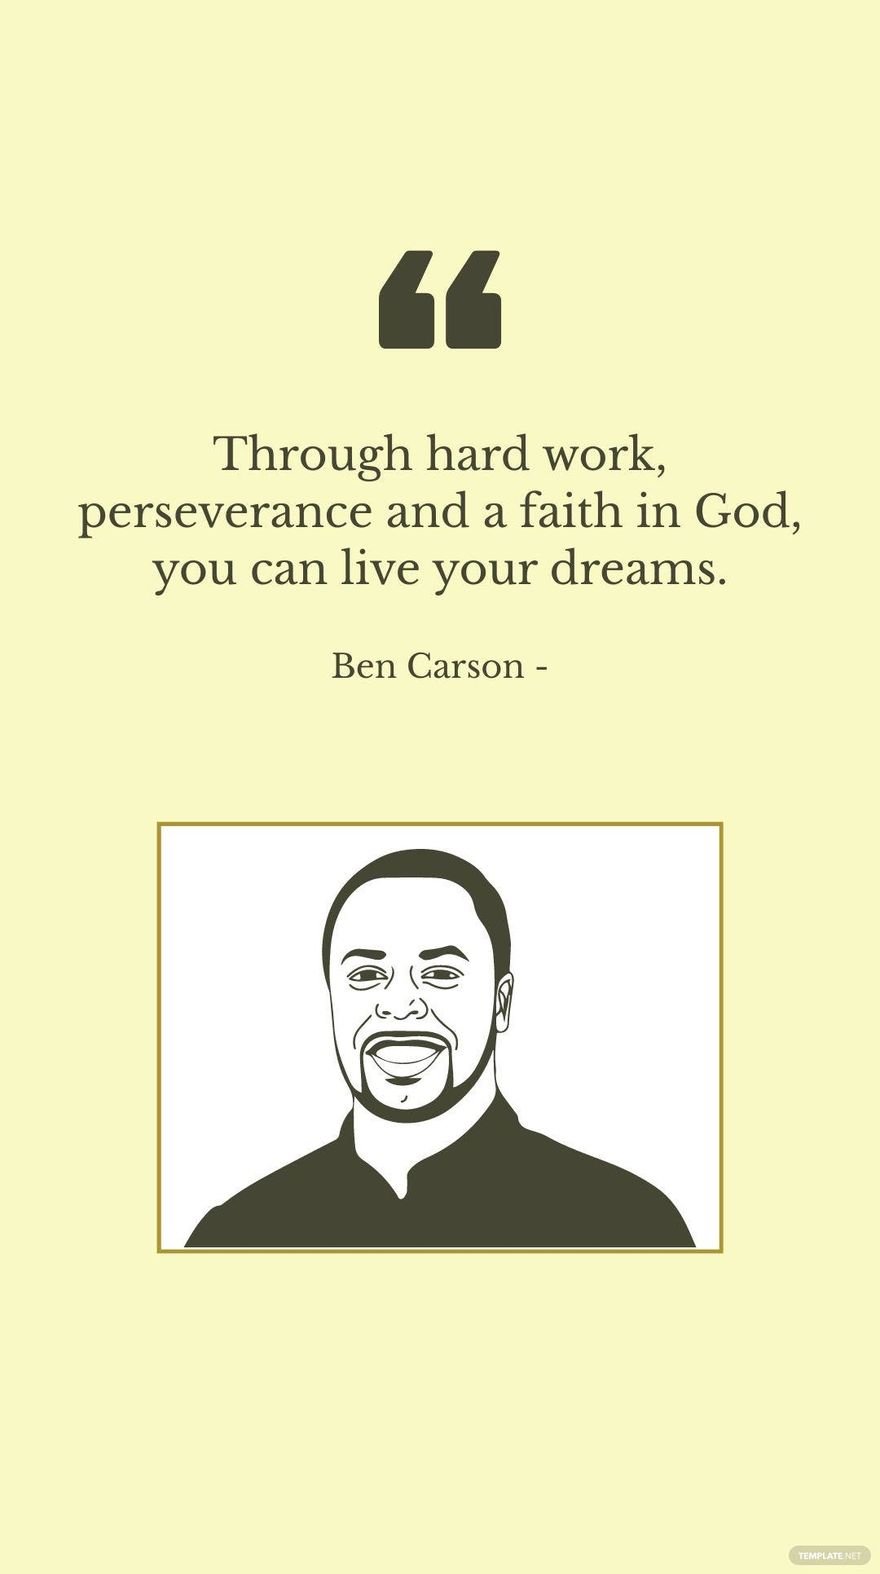 Ben Carson - Through hard work, perseverance and a faith in God, you can live your dreams. in JPG